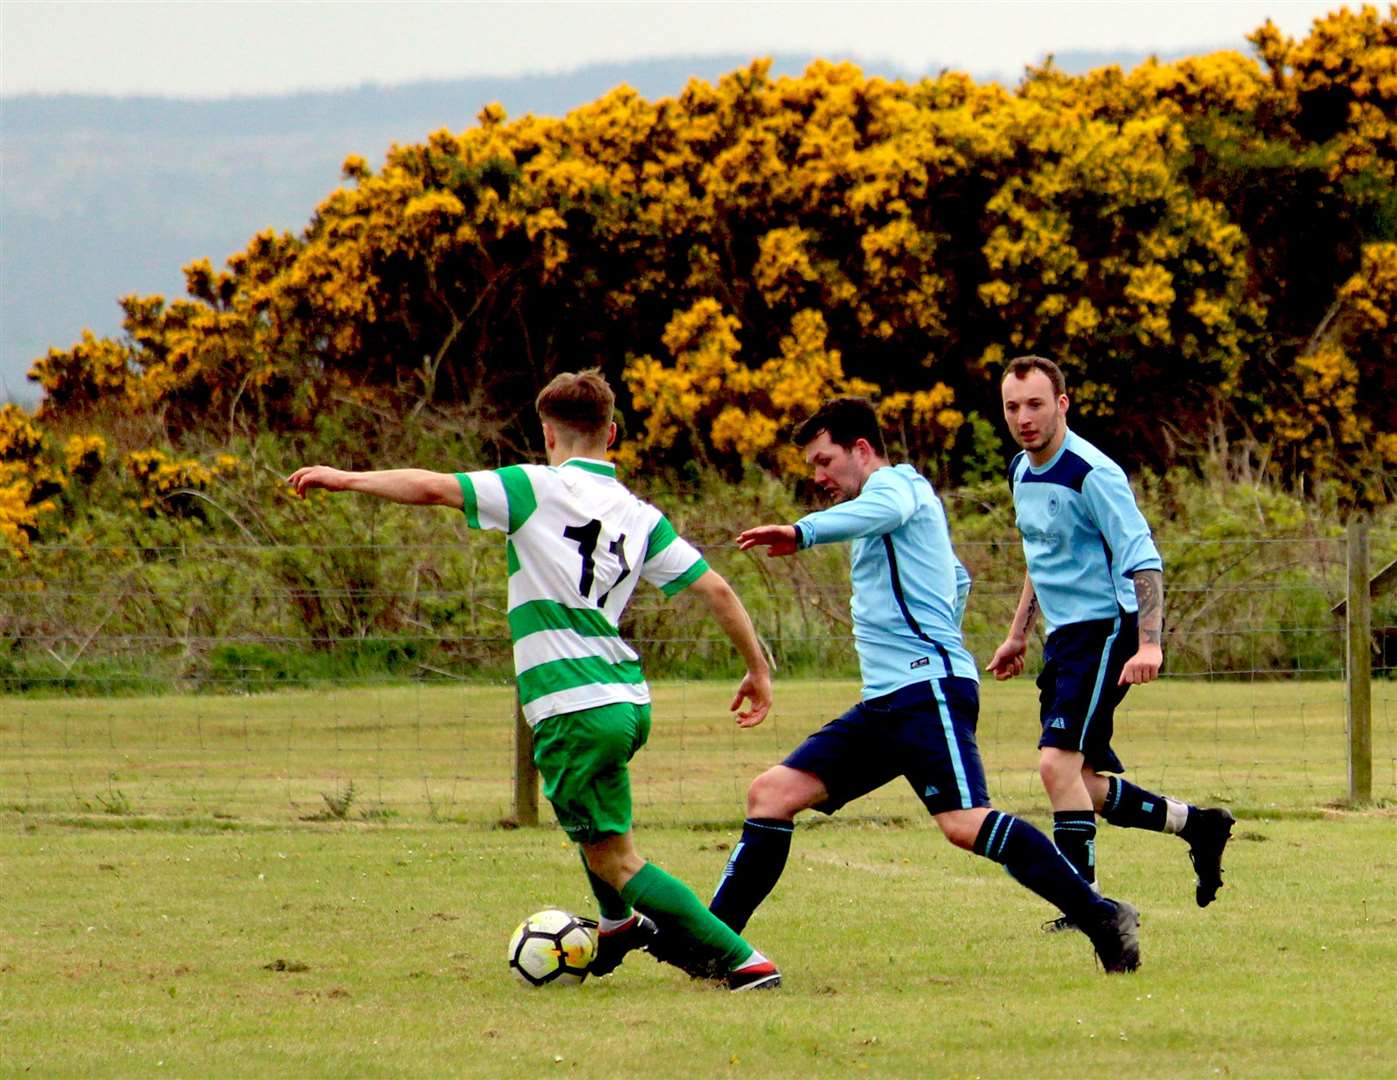 Helmsdale United and Golspie Stafford in action when last the teams met in 2019. Photo: Niall Harkiss